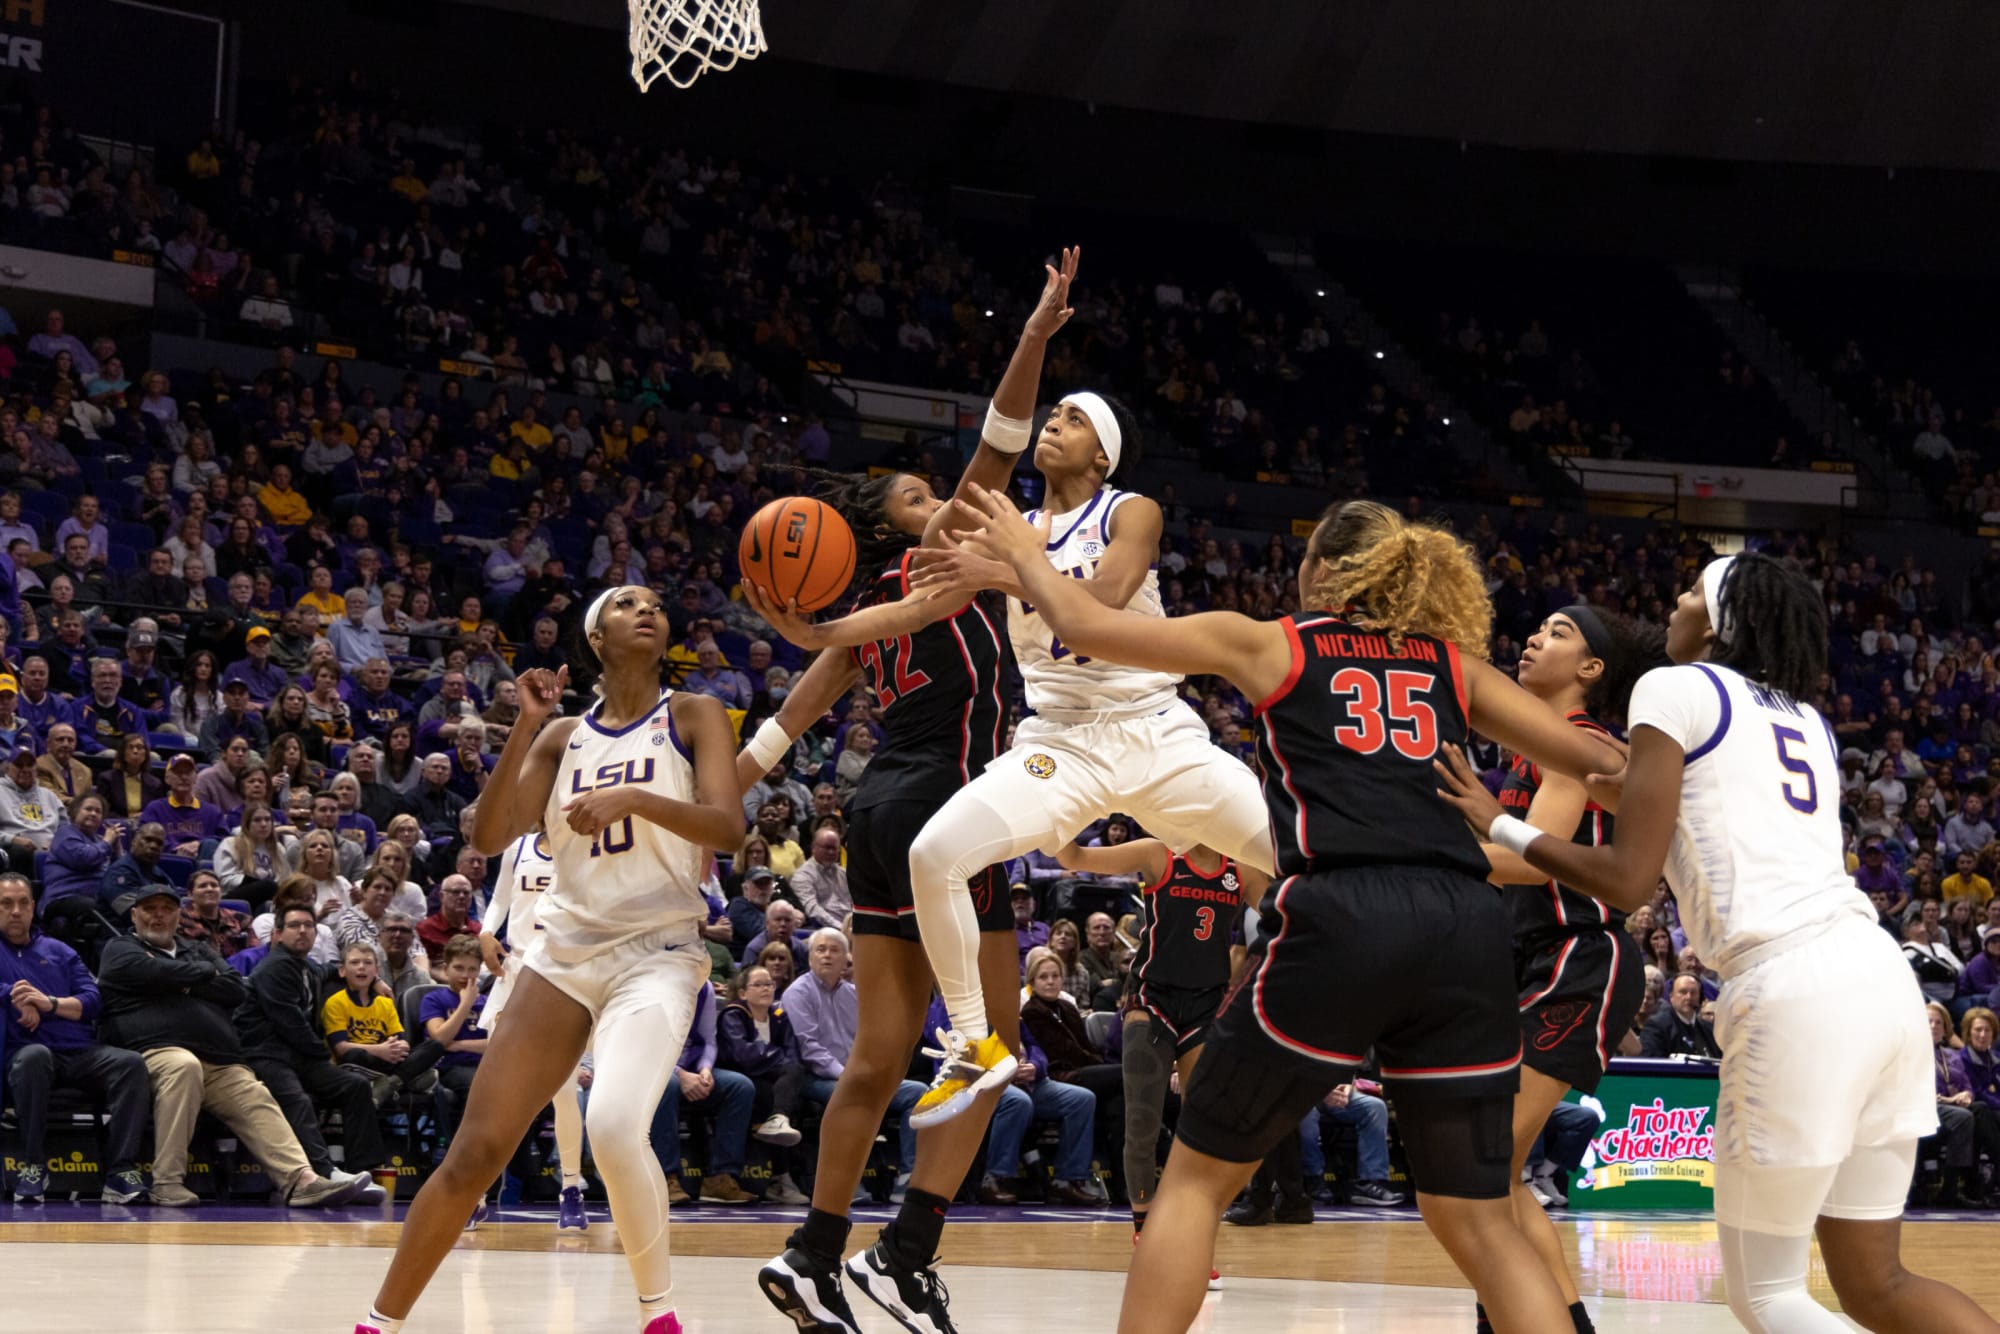 LSU Tigers outlast in overtime basketball thriller